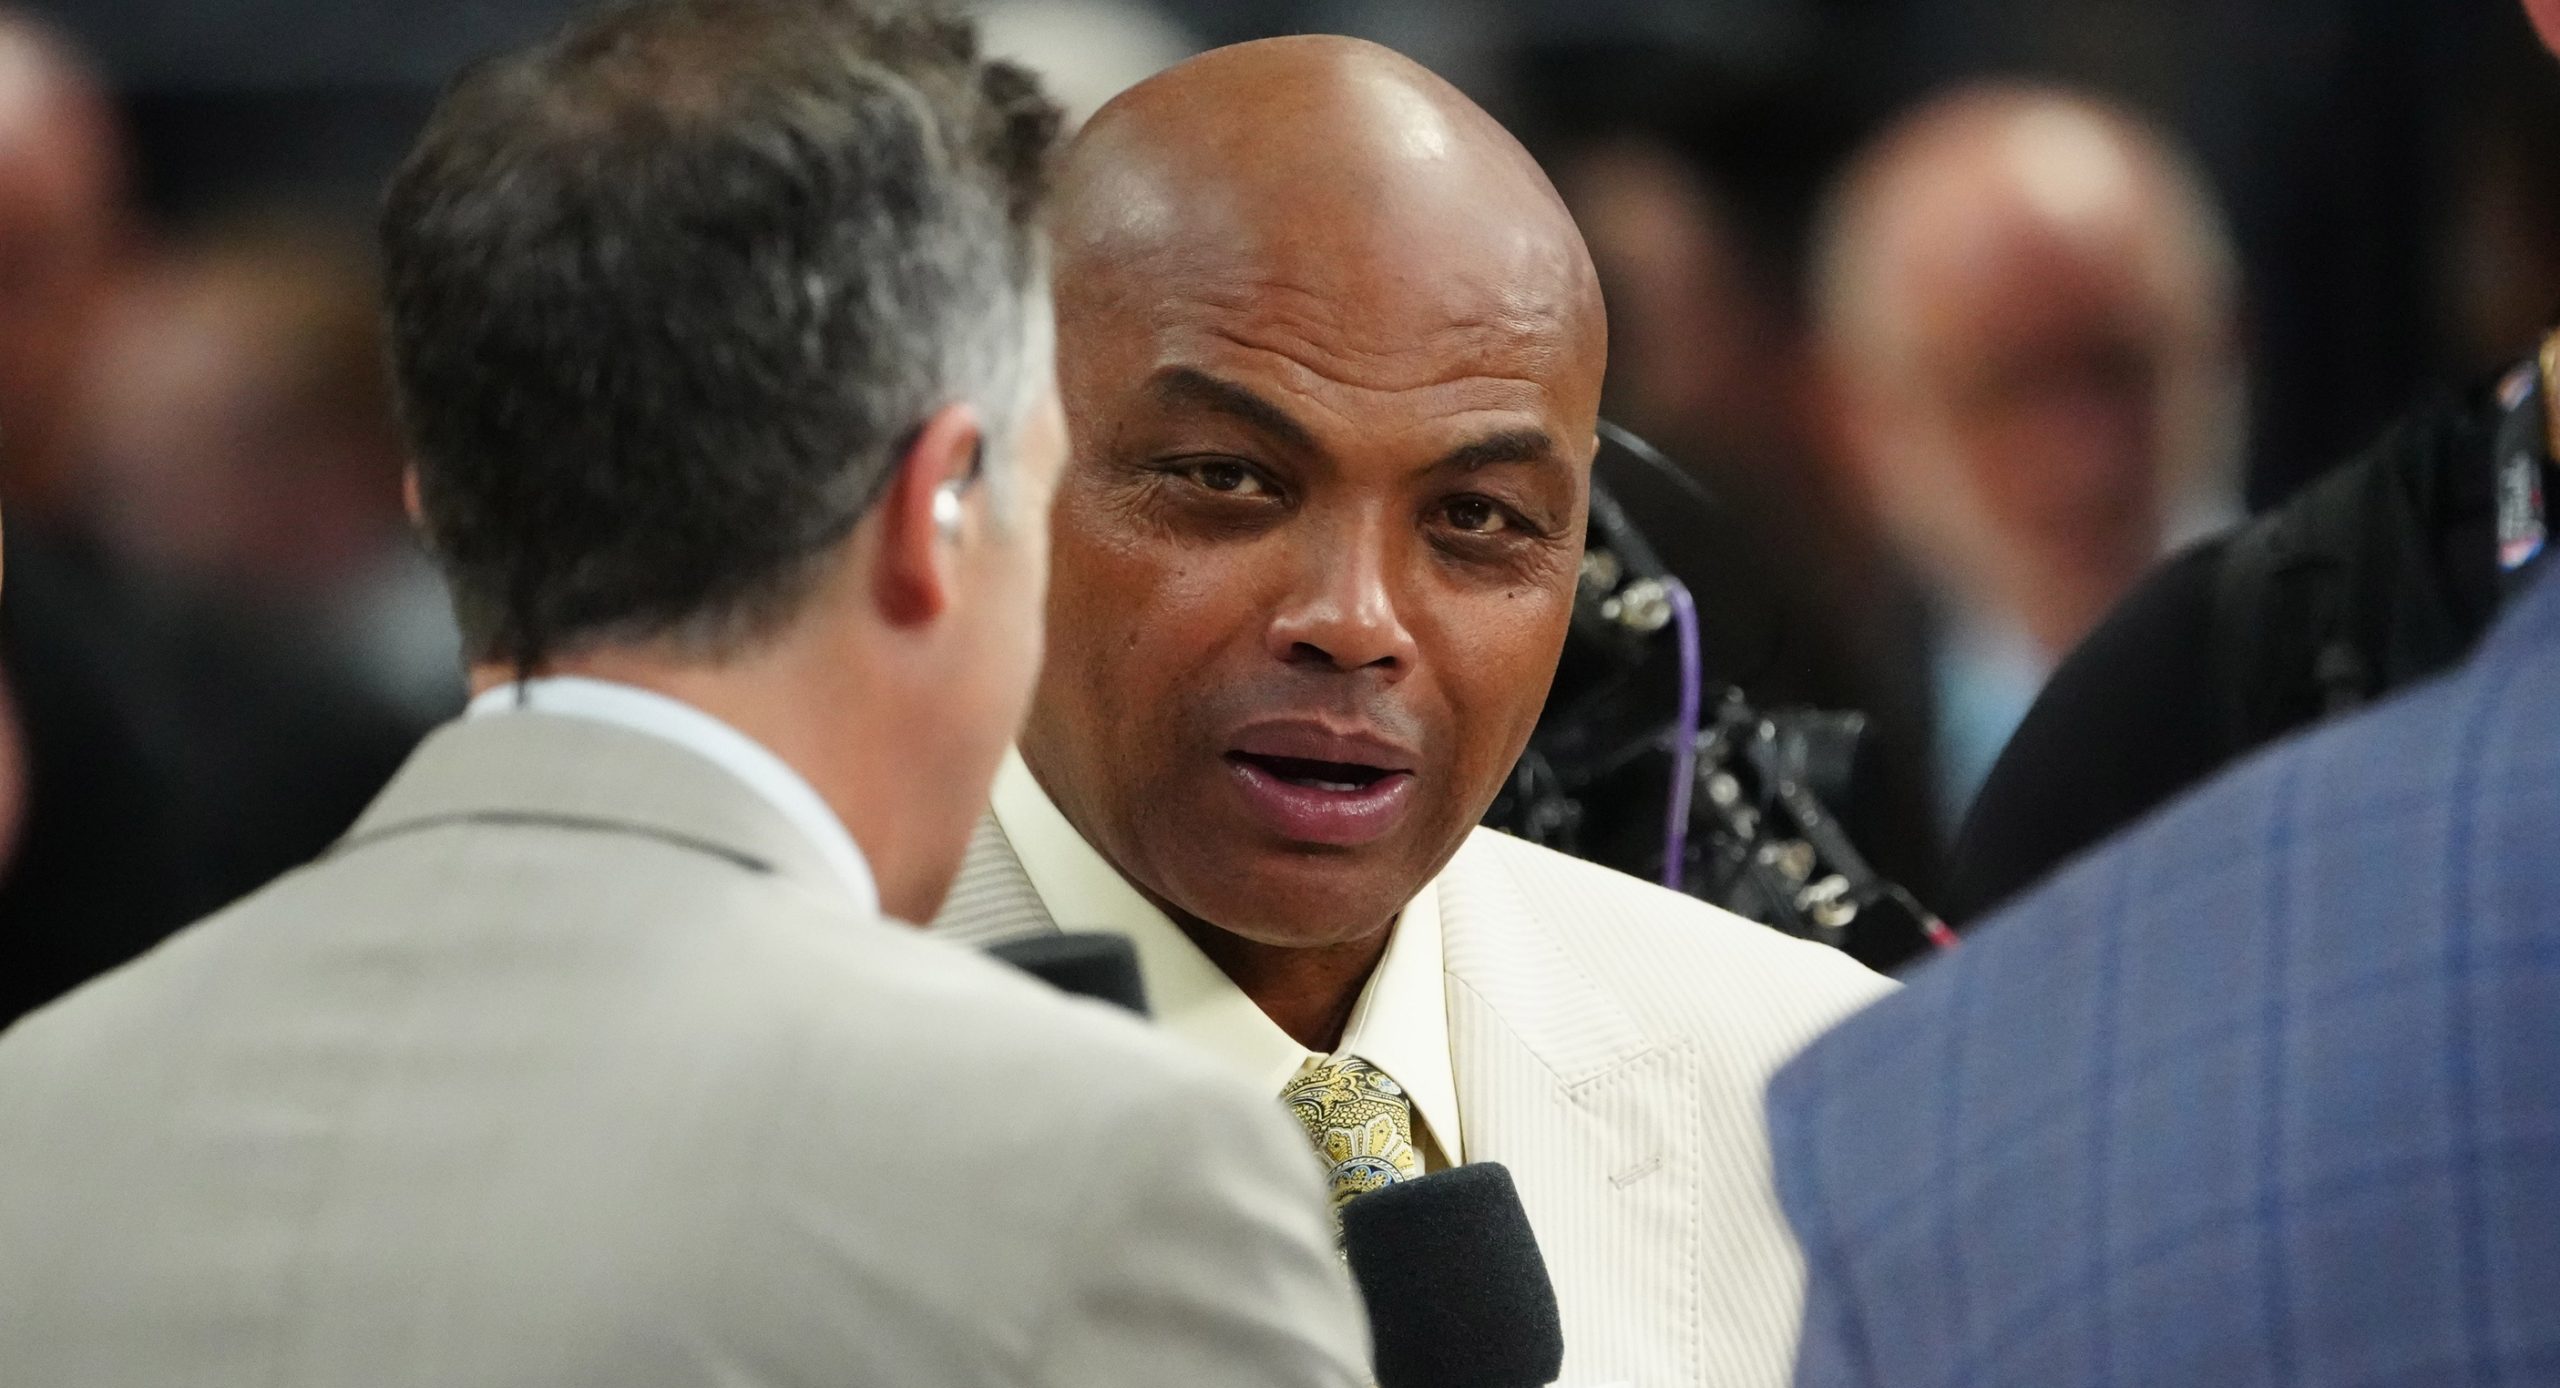 Jun 4, 2023; Denver, CO, USA; TNT sports analyst Charles Barkley speaks before game two between the Miami Heat and the Denver Nuggets in the 2023 NBA Finals at Ball Arena. Mandatory Credit: Ron Chenoy-USA TODAY Sports